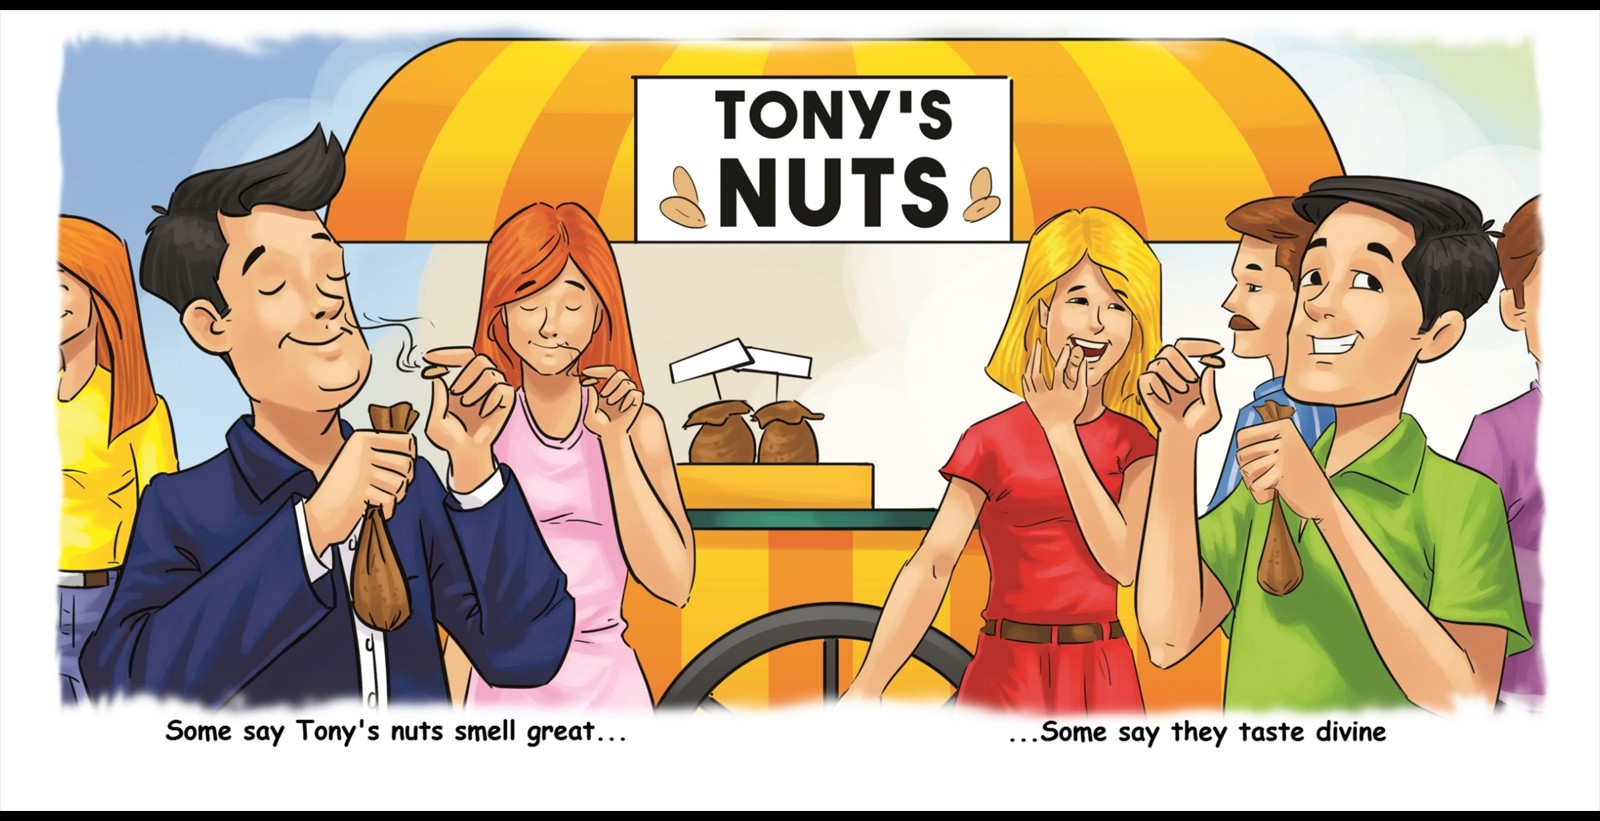 Put Tonys Nuts in Your MouthTEASER2